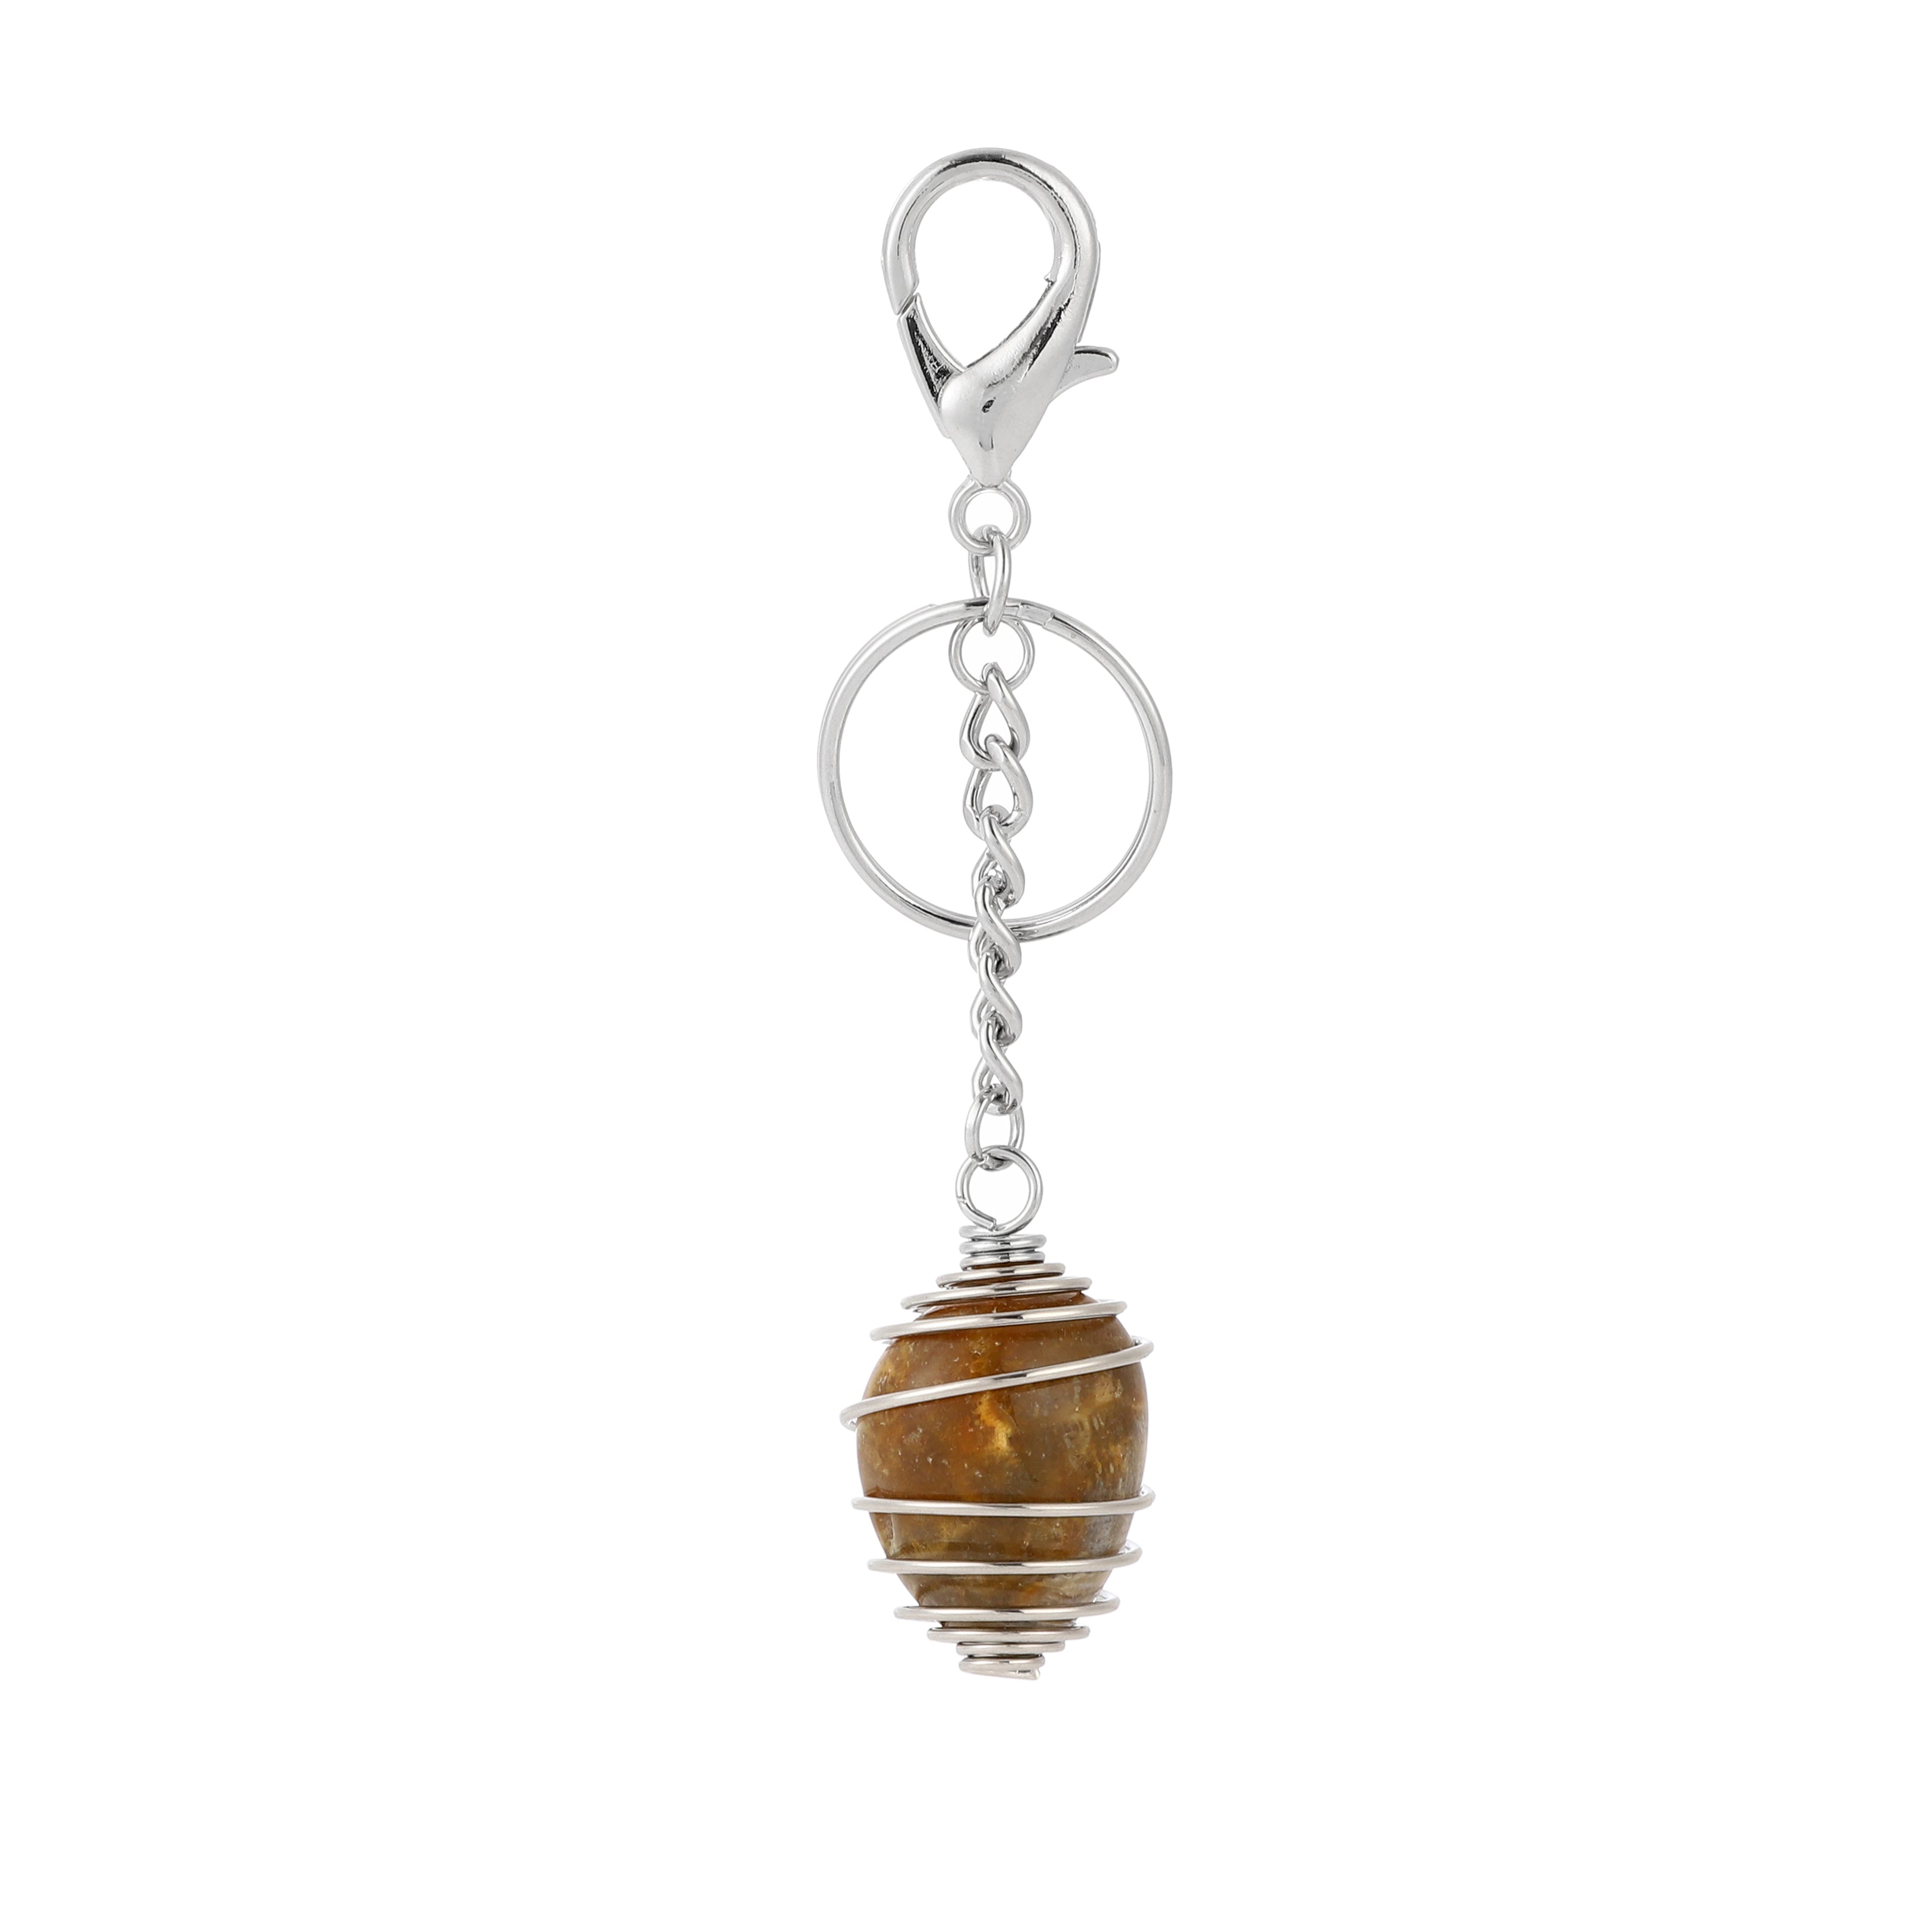 AIVILOD Tiger Eye Keychain, Gemstone Bag Charms, Keychain with Clasp, Gold Keychain Accessories, Mini Tassel Keychain, Horn Pendant, Beaded Key Ring